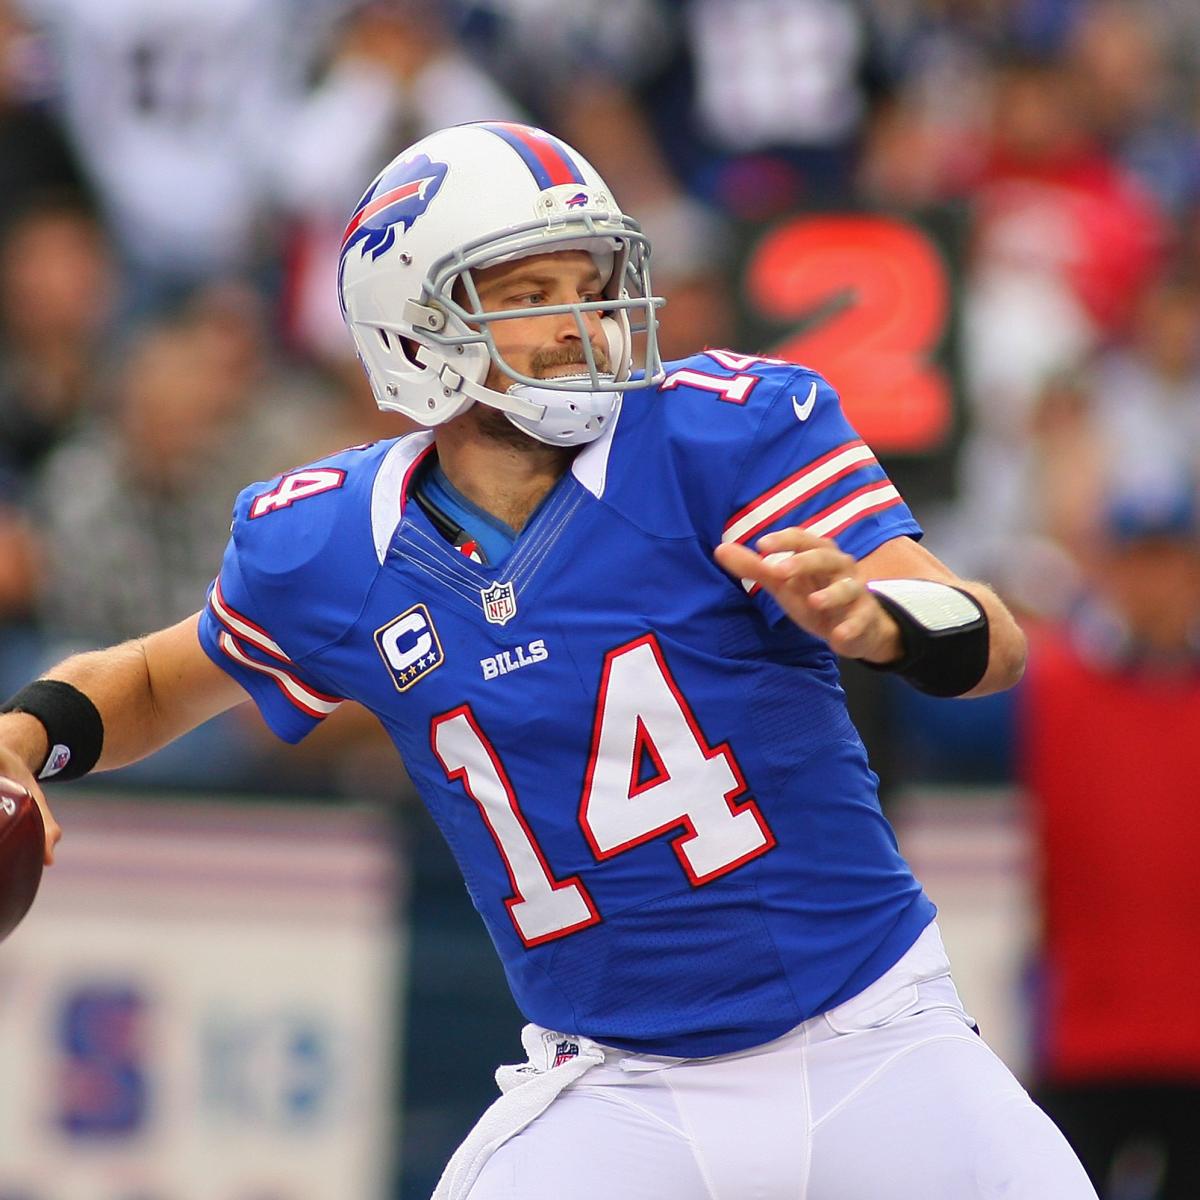 Would Bills teammates trade that victory to put Ryan Fitzpatrick